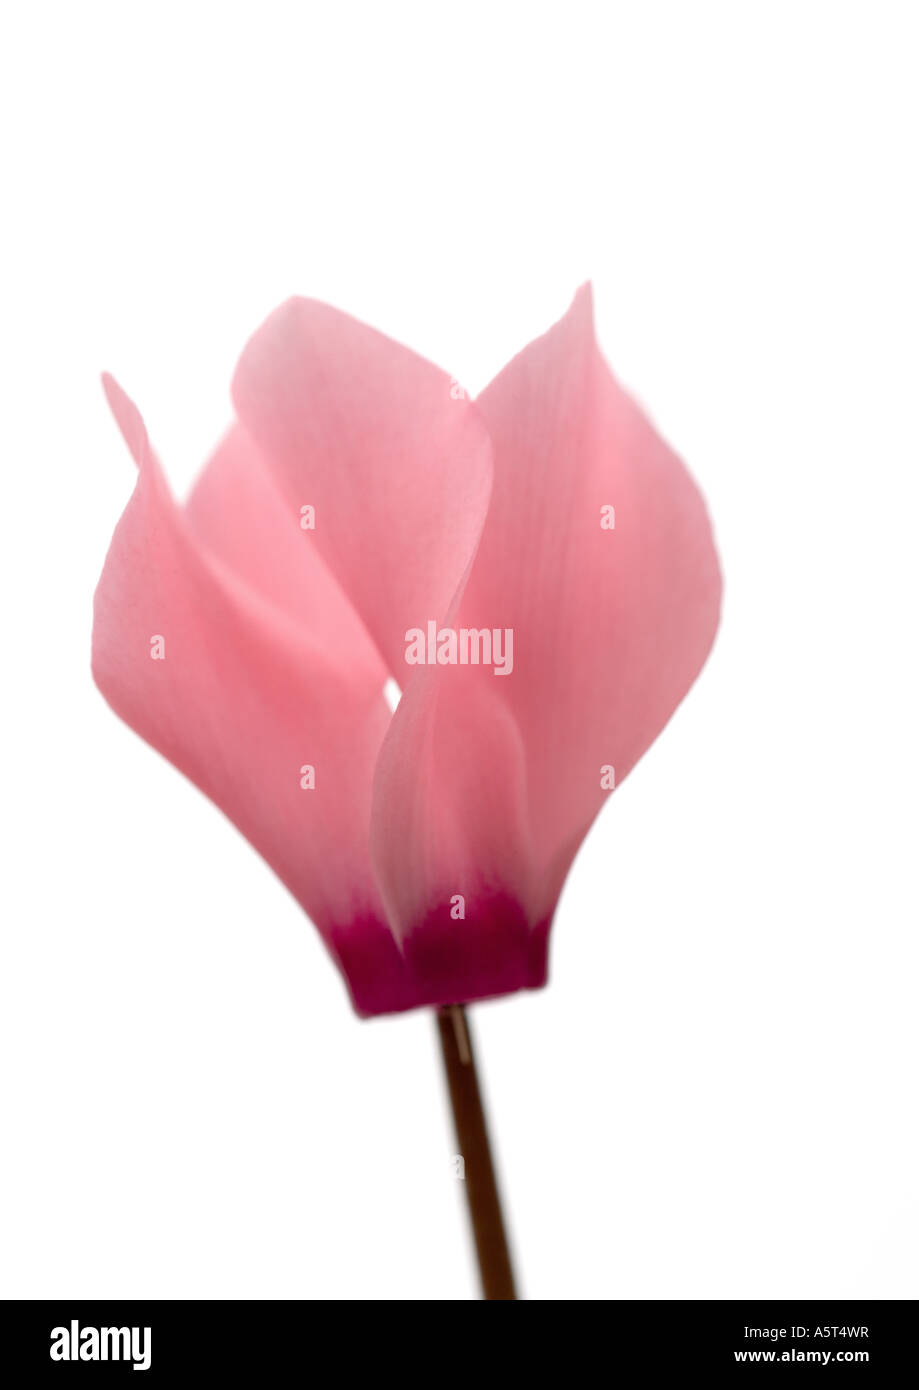 Pink cyclamen flower, close-up Stock Photo